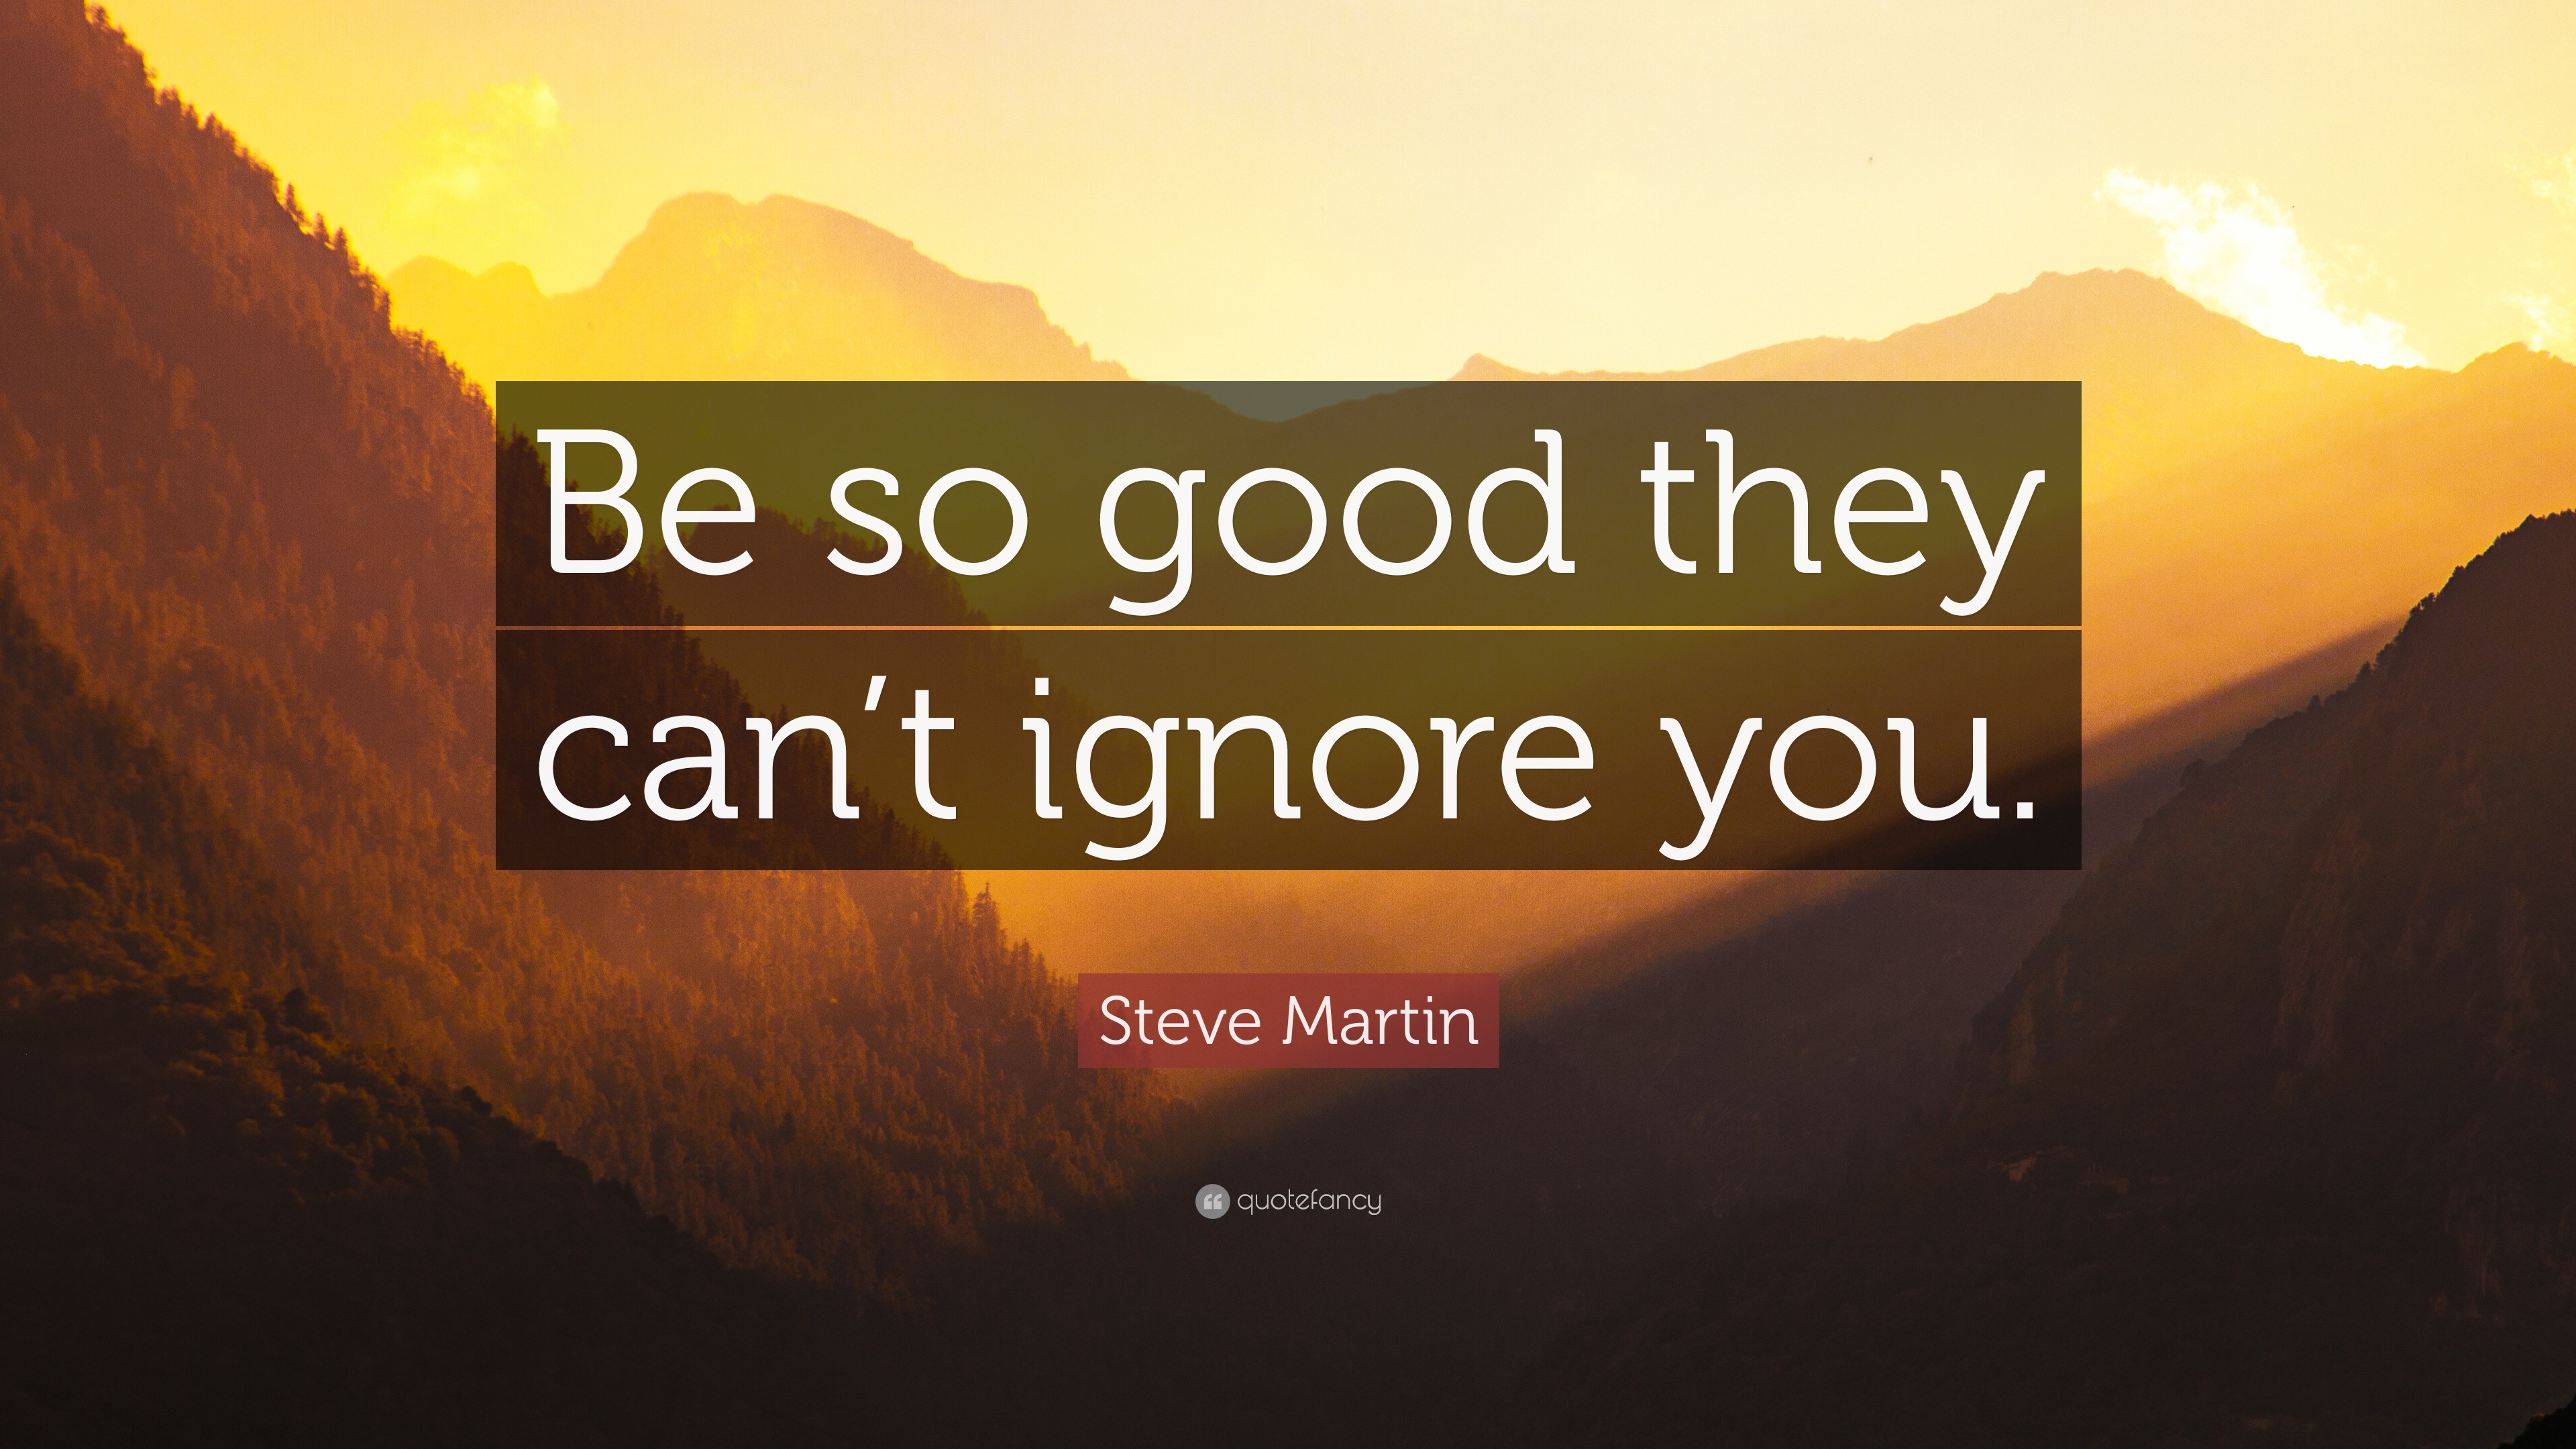 Steve Martin Quote: “Be so good they can’t ignore you.” (20 wallpapers